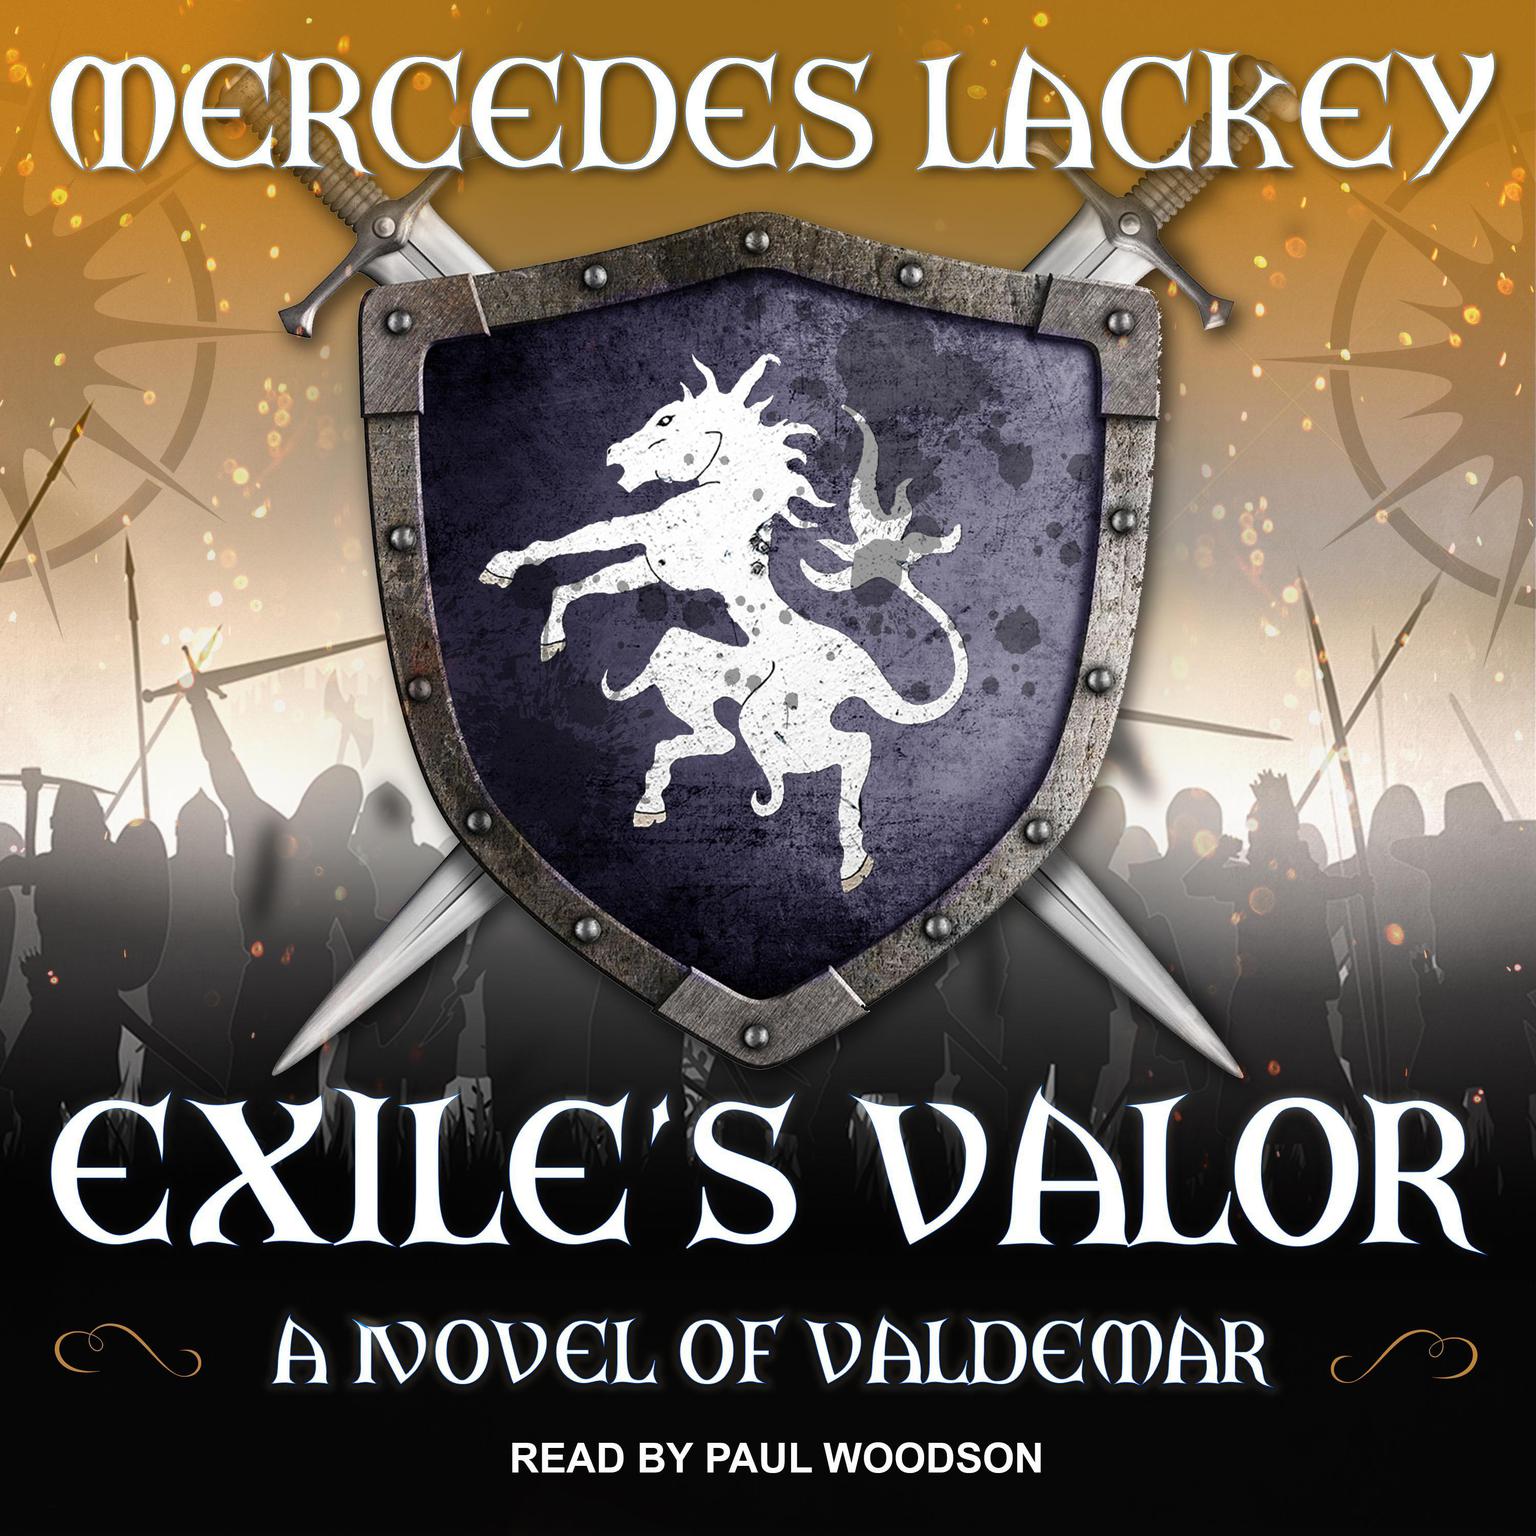 Exile’s Valor: A Novel of Valdemar Audiobook, by Mercedes Lackey